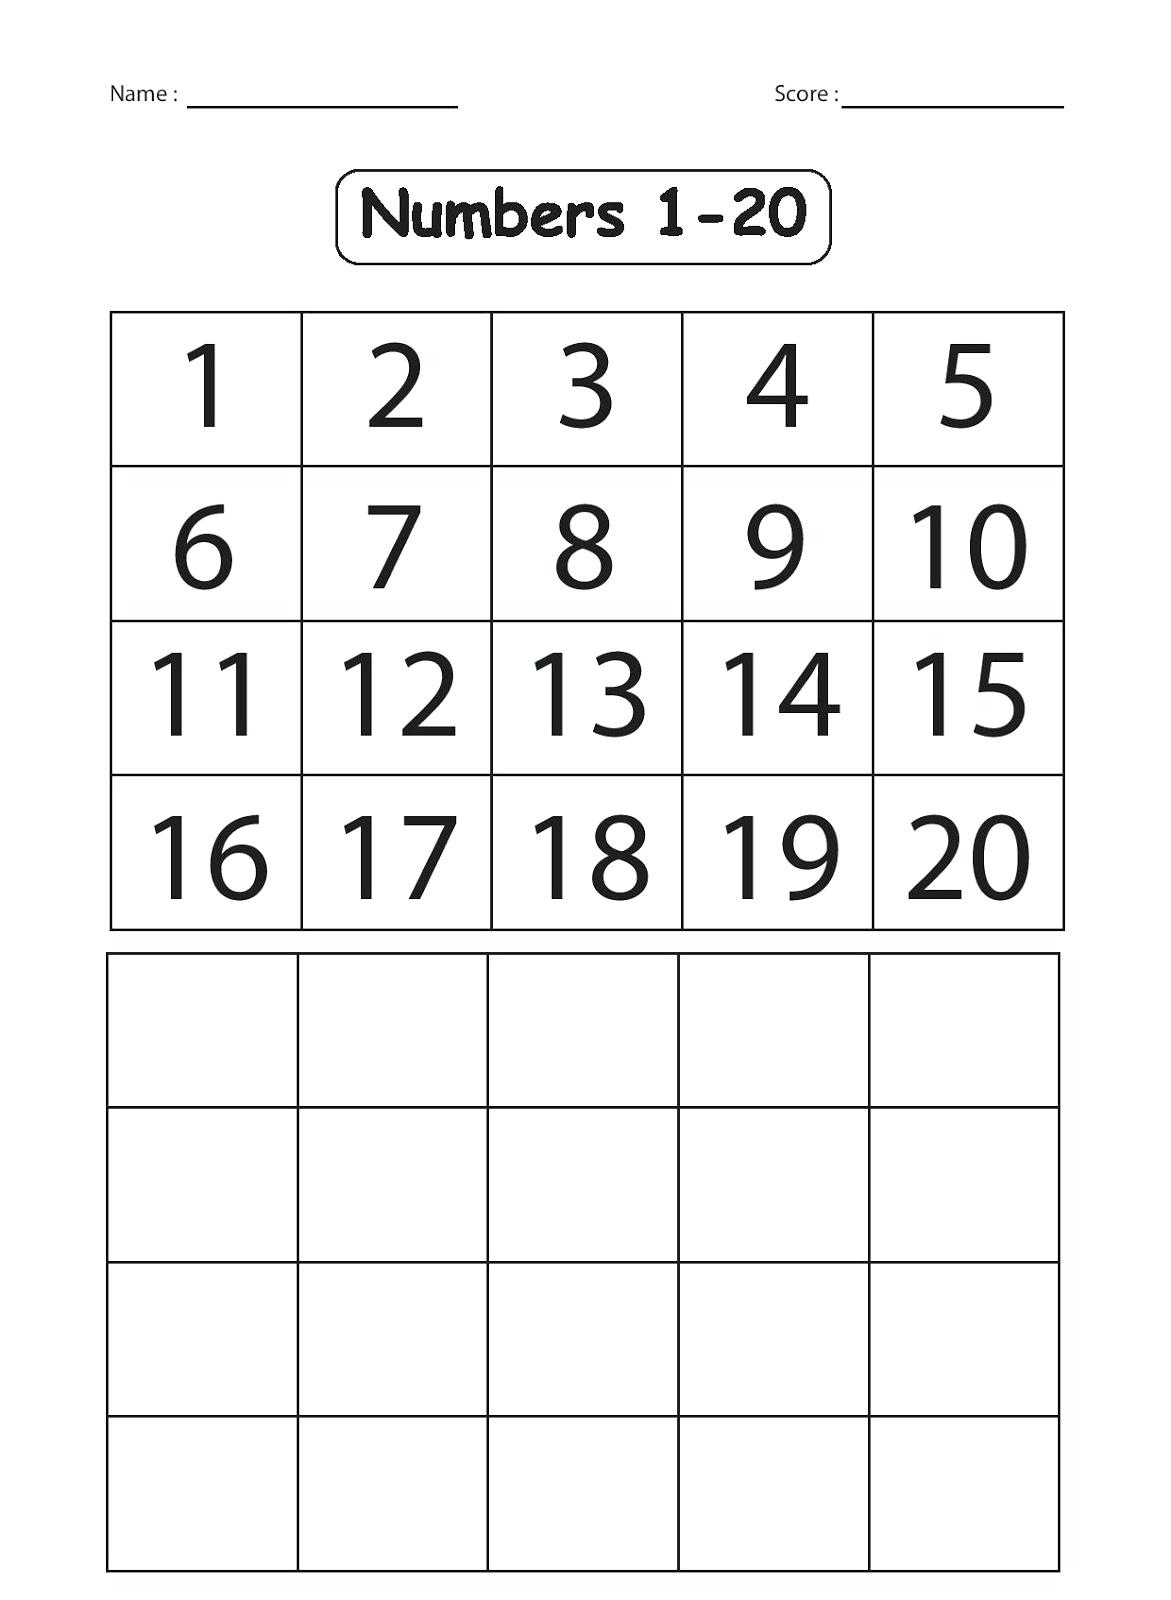 Free Printable Number Counting Worksheets Count And Match Count 